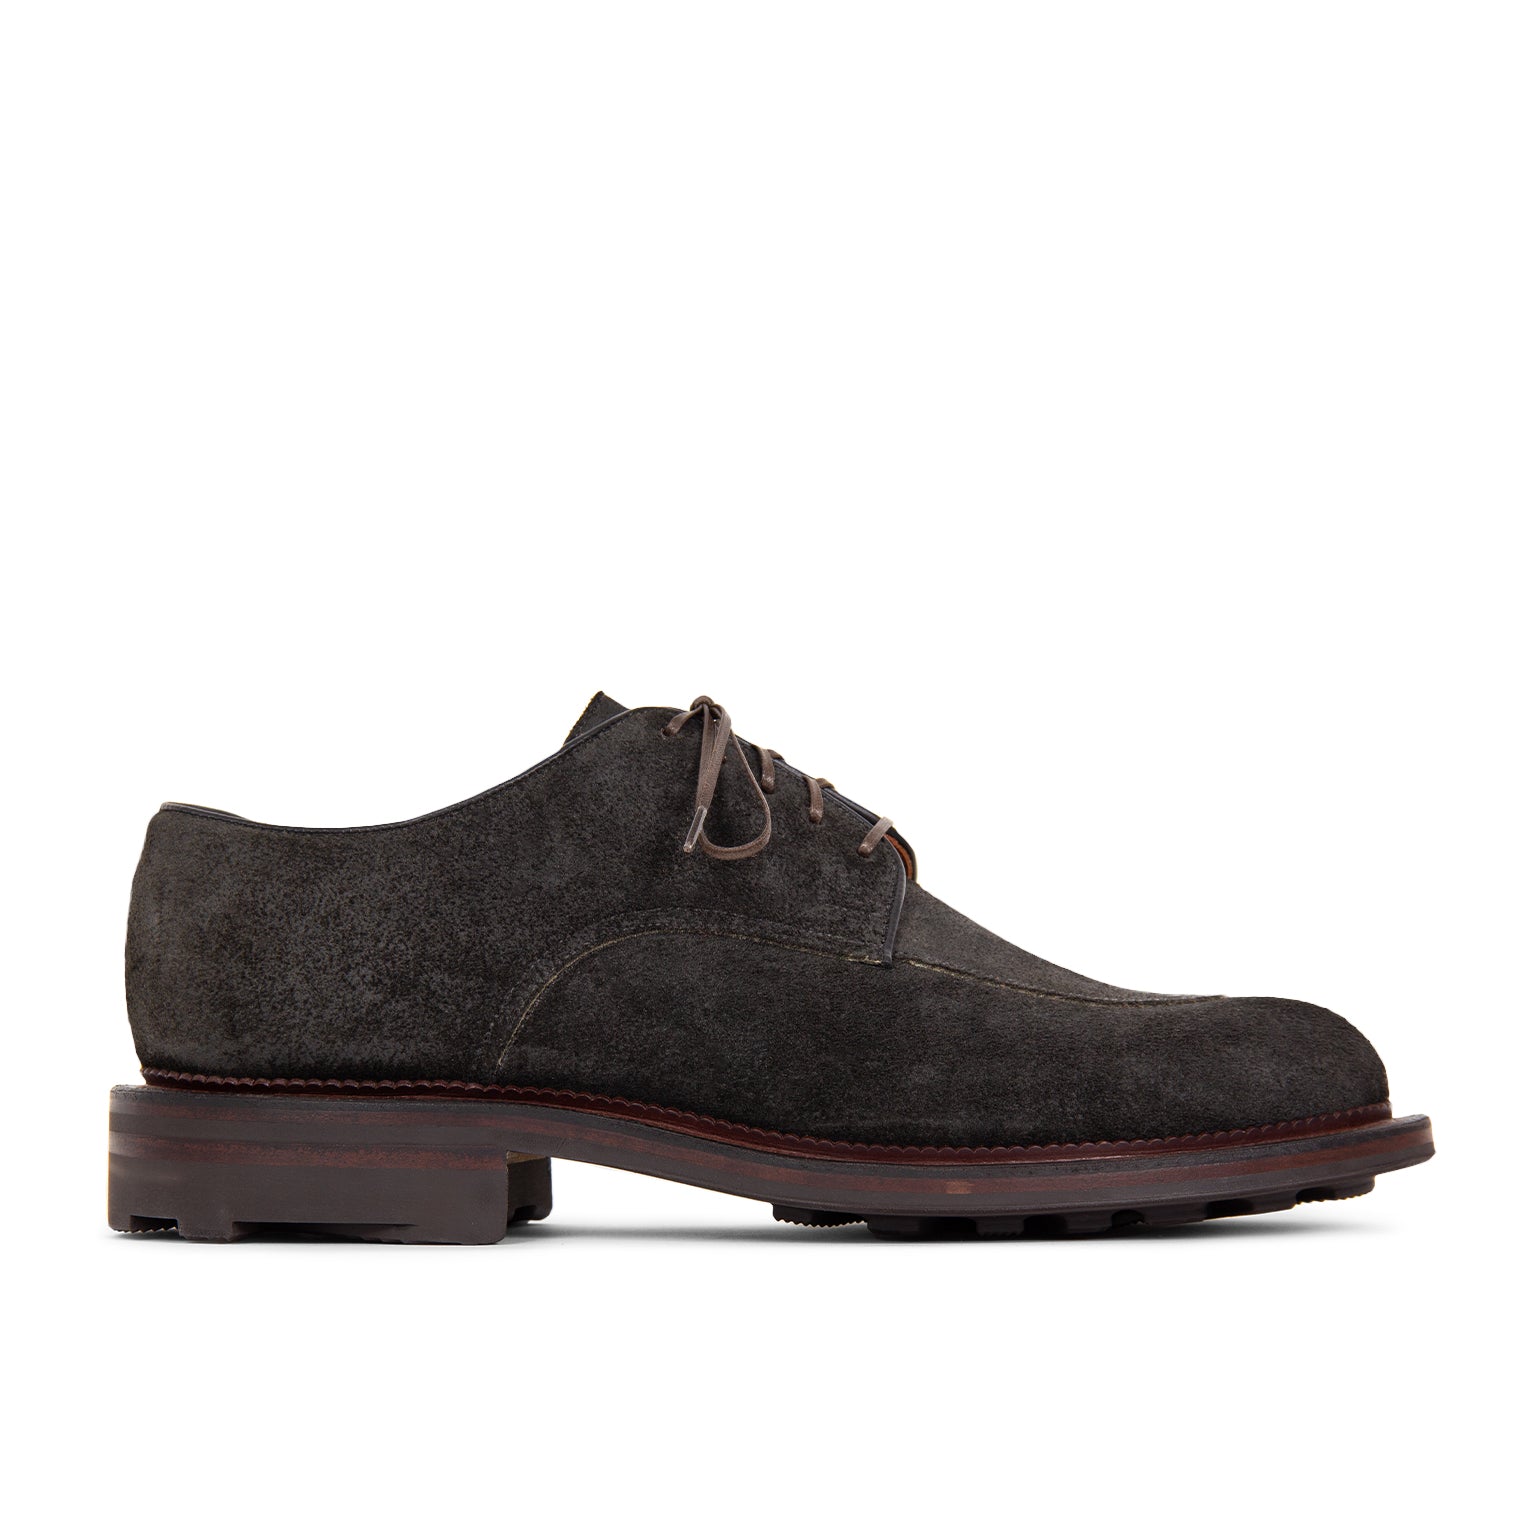 Limited Release – VIBERG